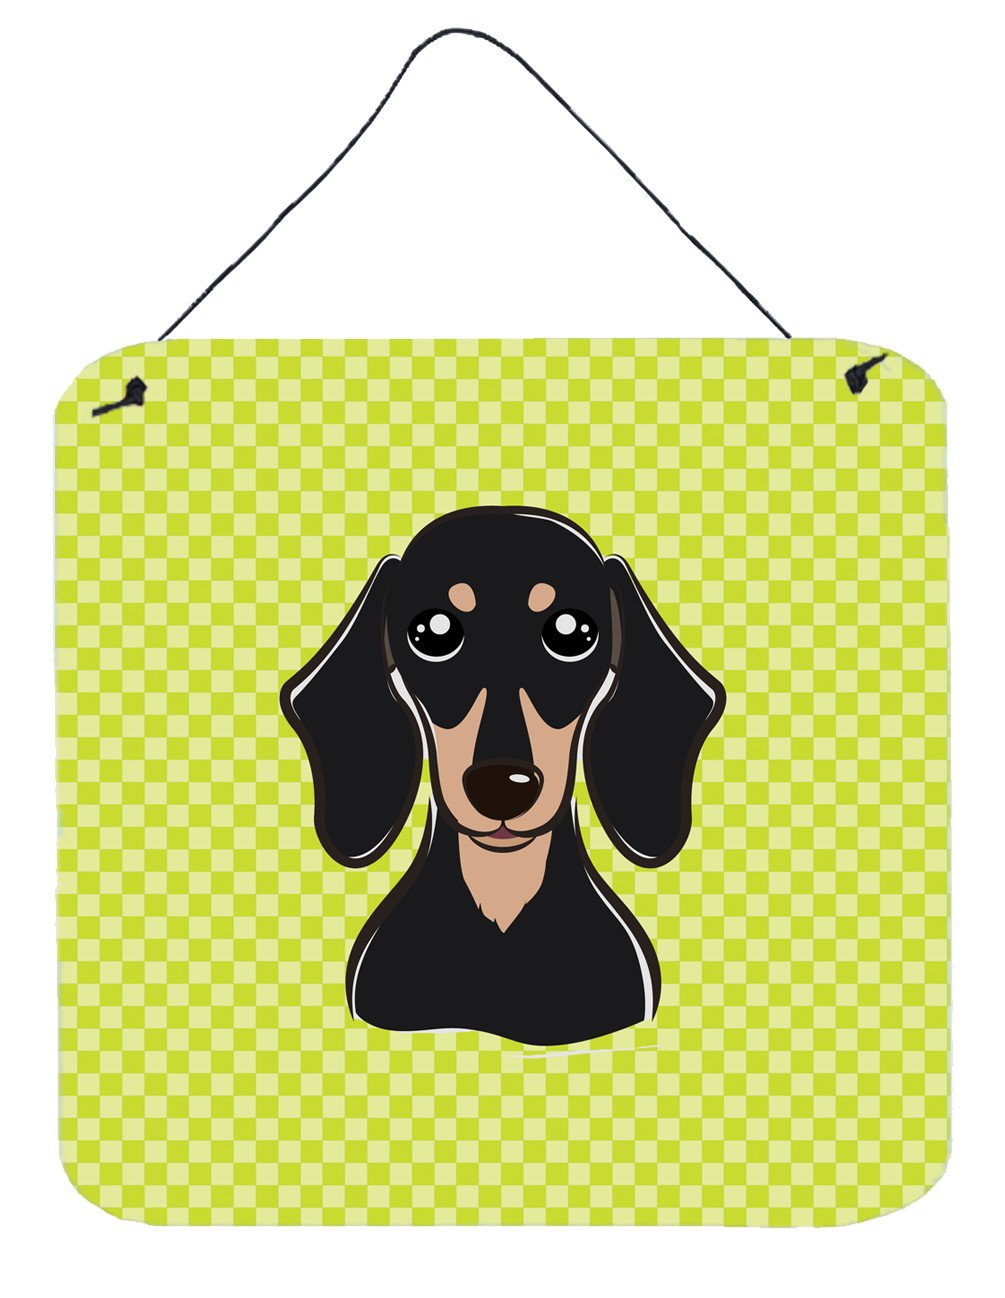 Checkerboard Lime Green Smooth Black and Tan Dachshund Wall or Door Hanging Prints BB1277DS66 by Caroline's Treasures